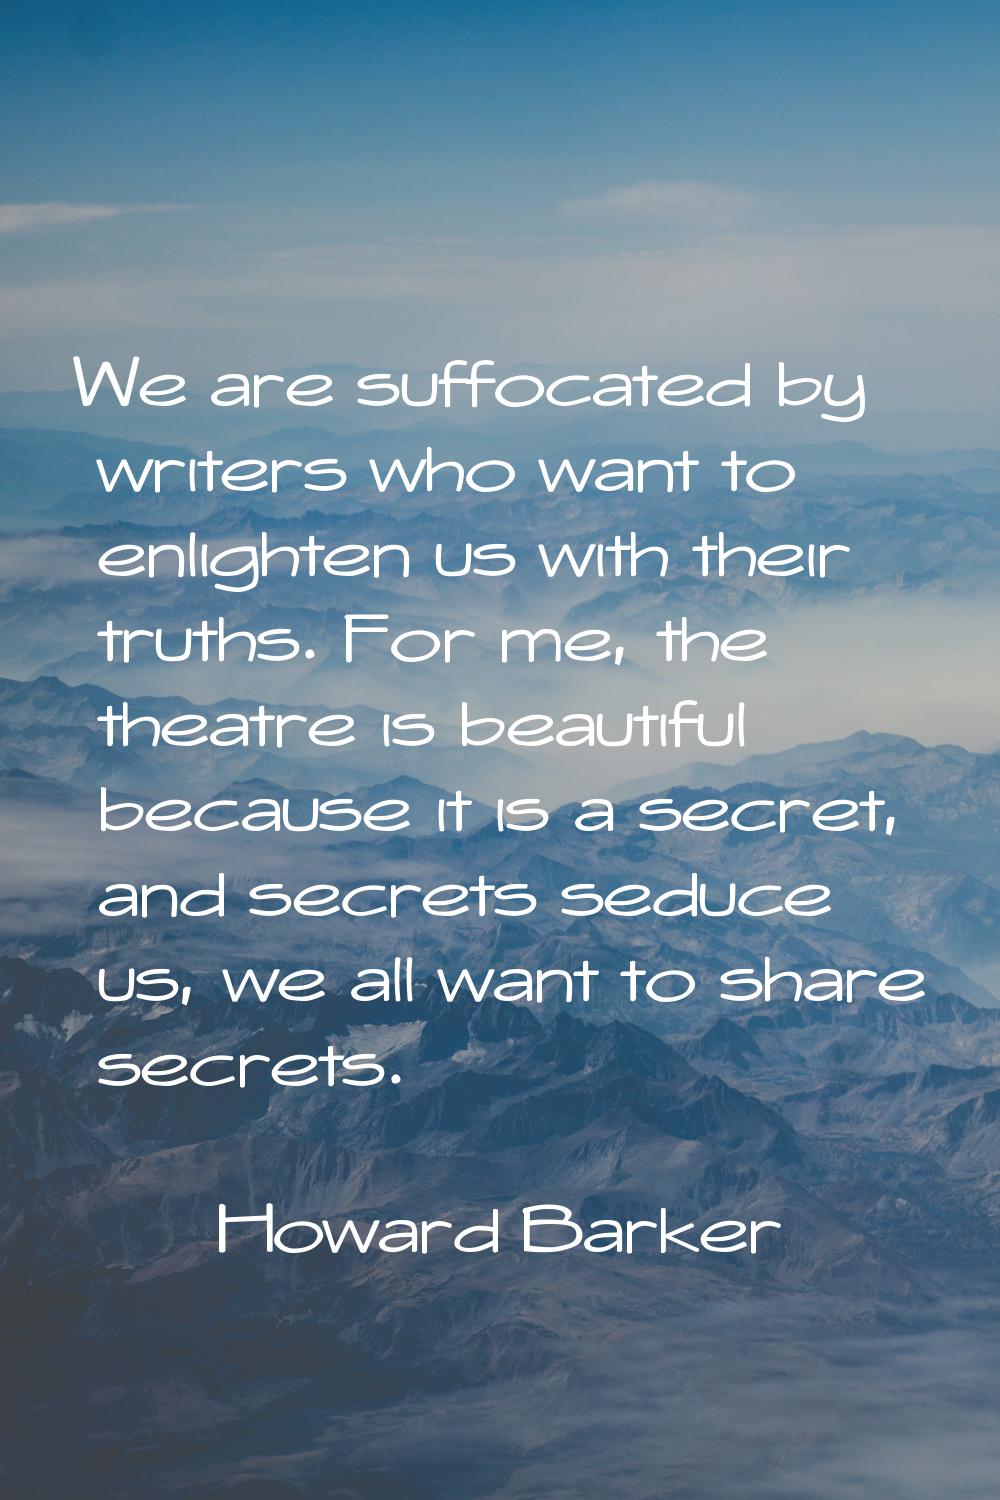 We are suffocated by writers who want to enlighten us with their truths. For me, the theatre is bea